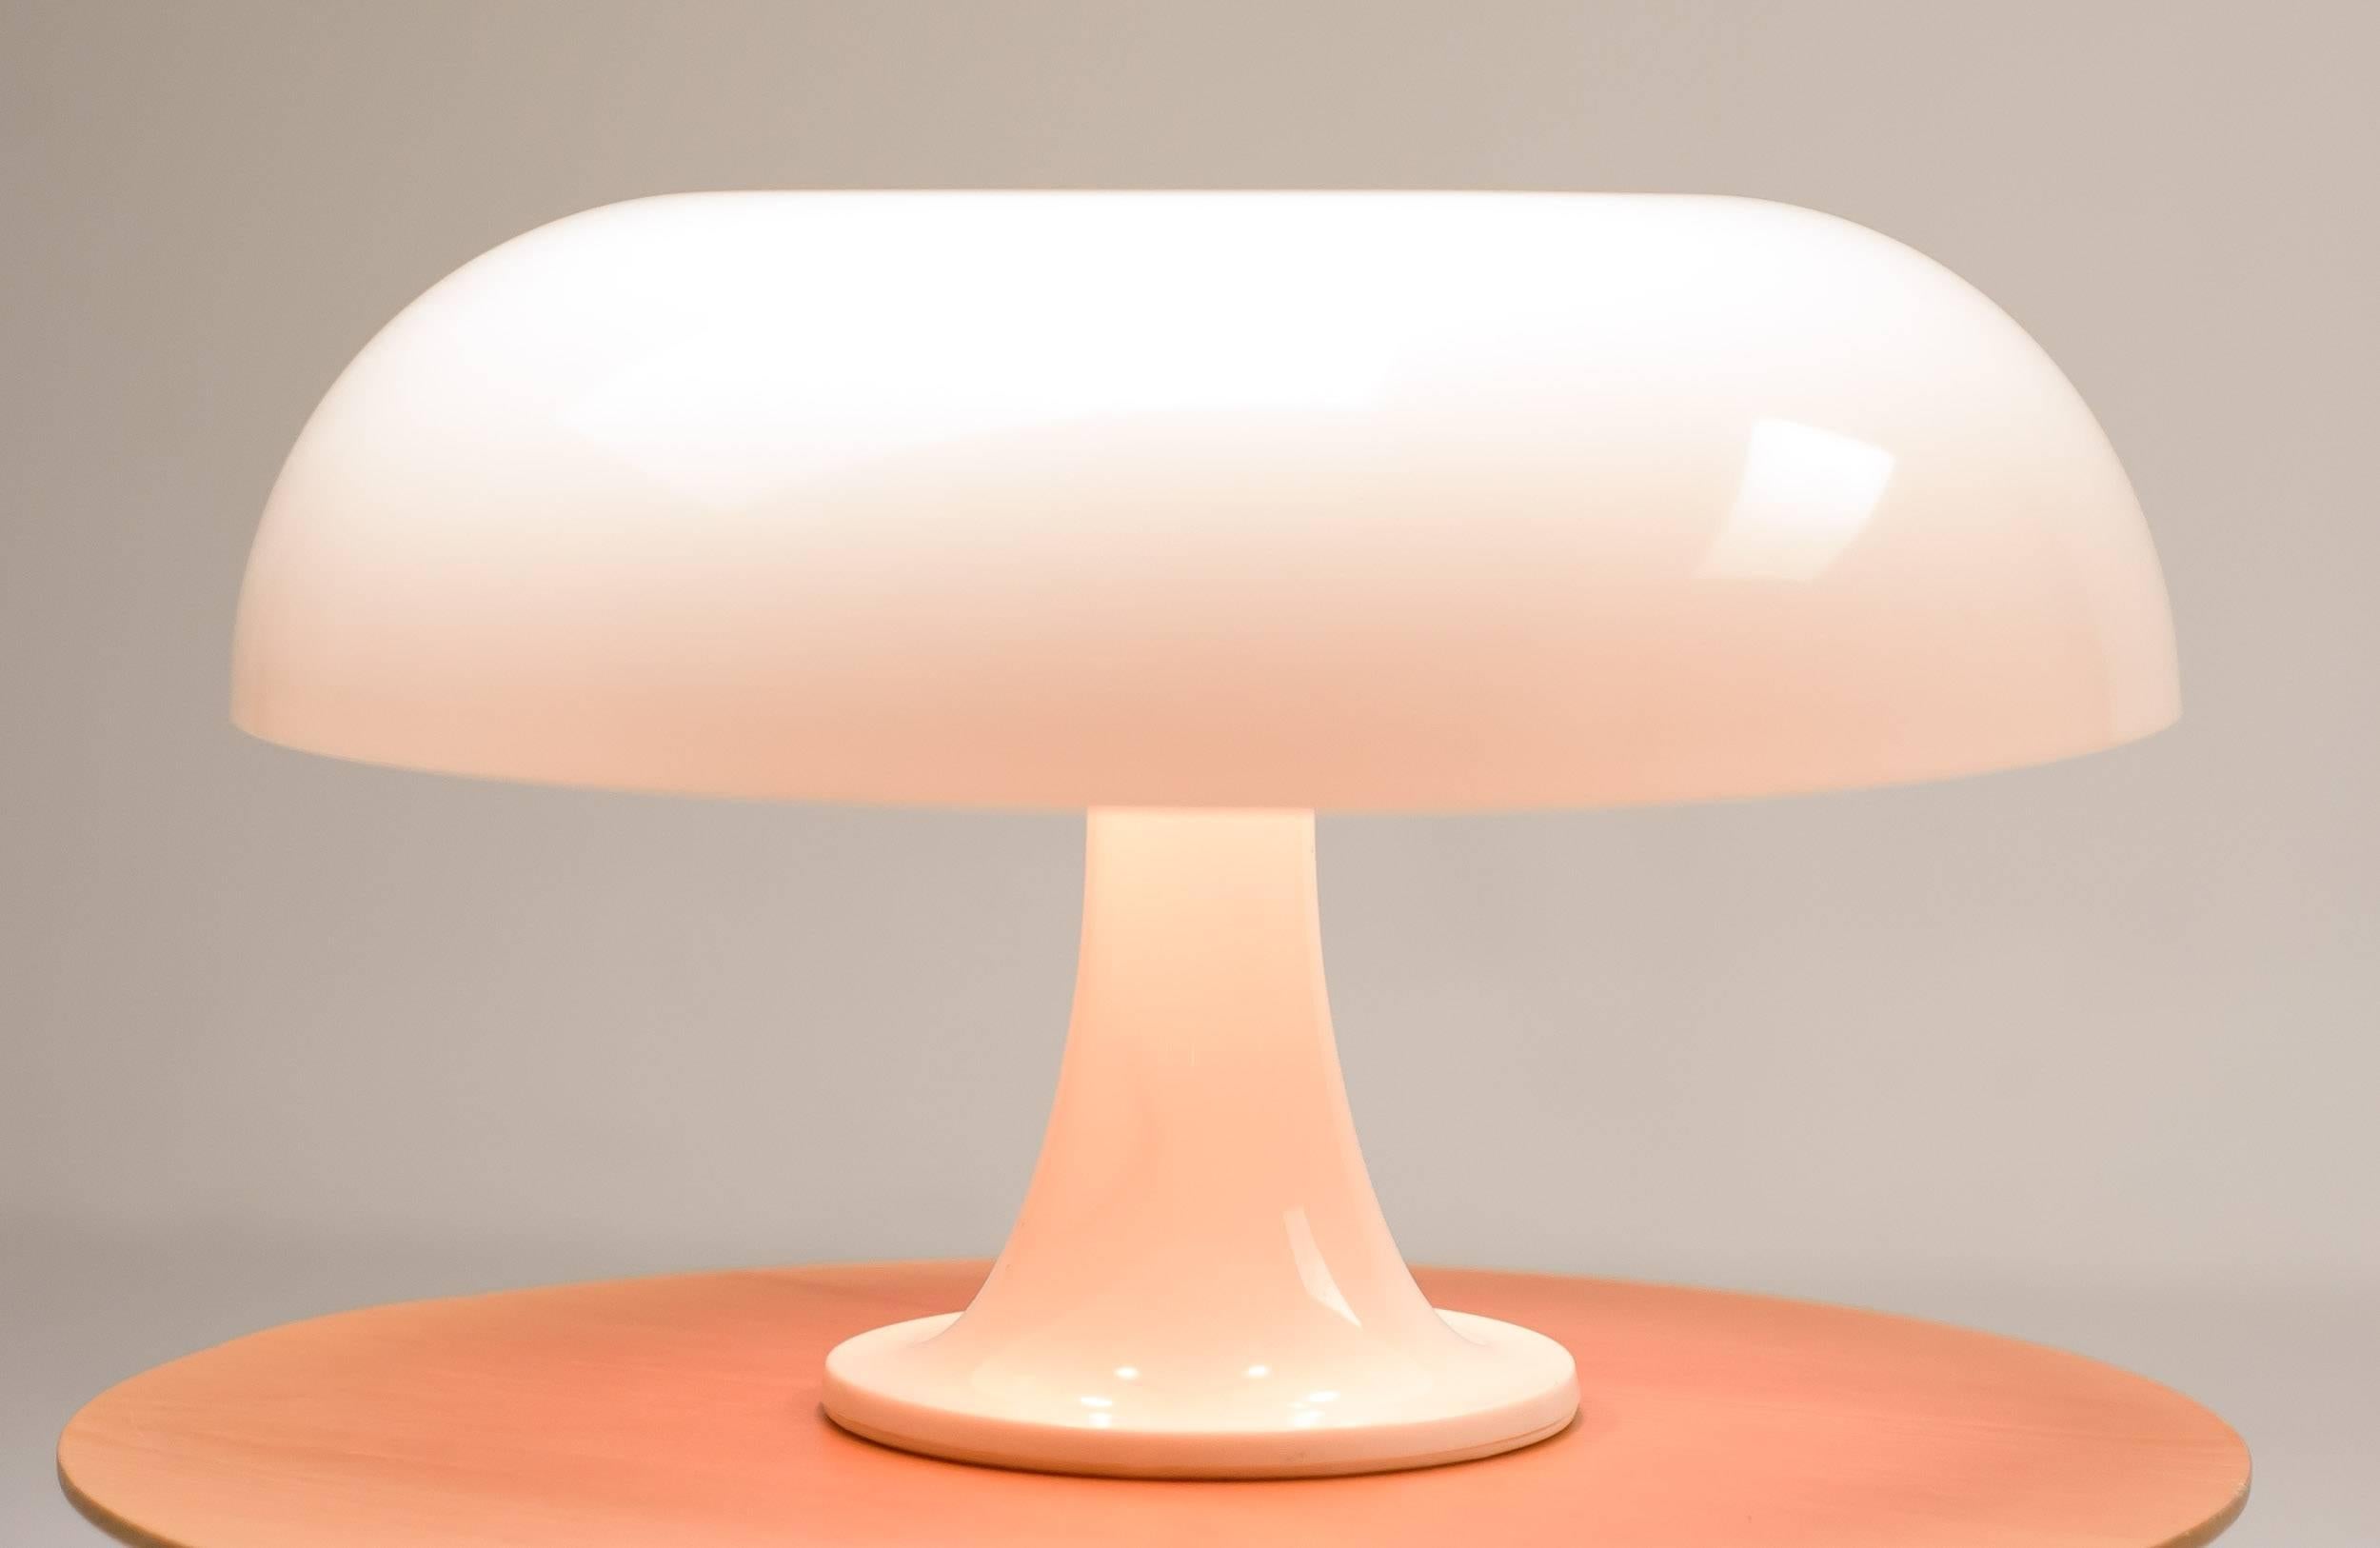 The Nesso table lamp provides general ambient light and features a body and diffuser formed with injection-molded ABS Thermoplastic. This modern classic is included in the collections of many museums, including the MOMA. 
Designed by Giancarlo